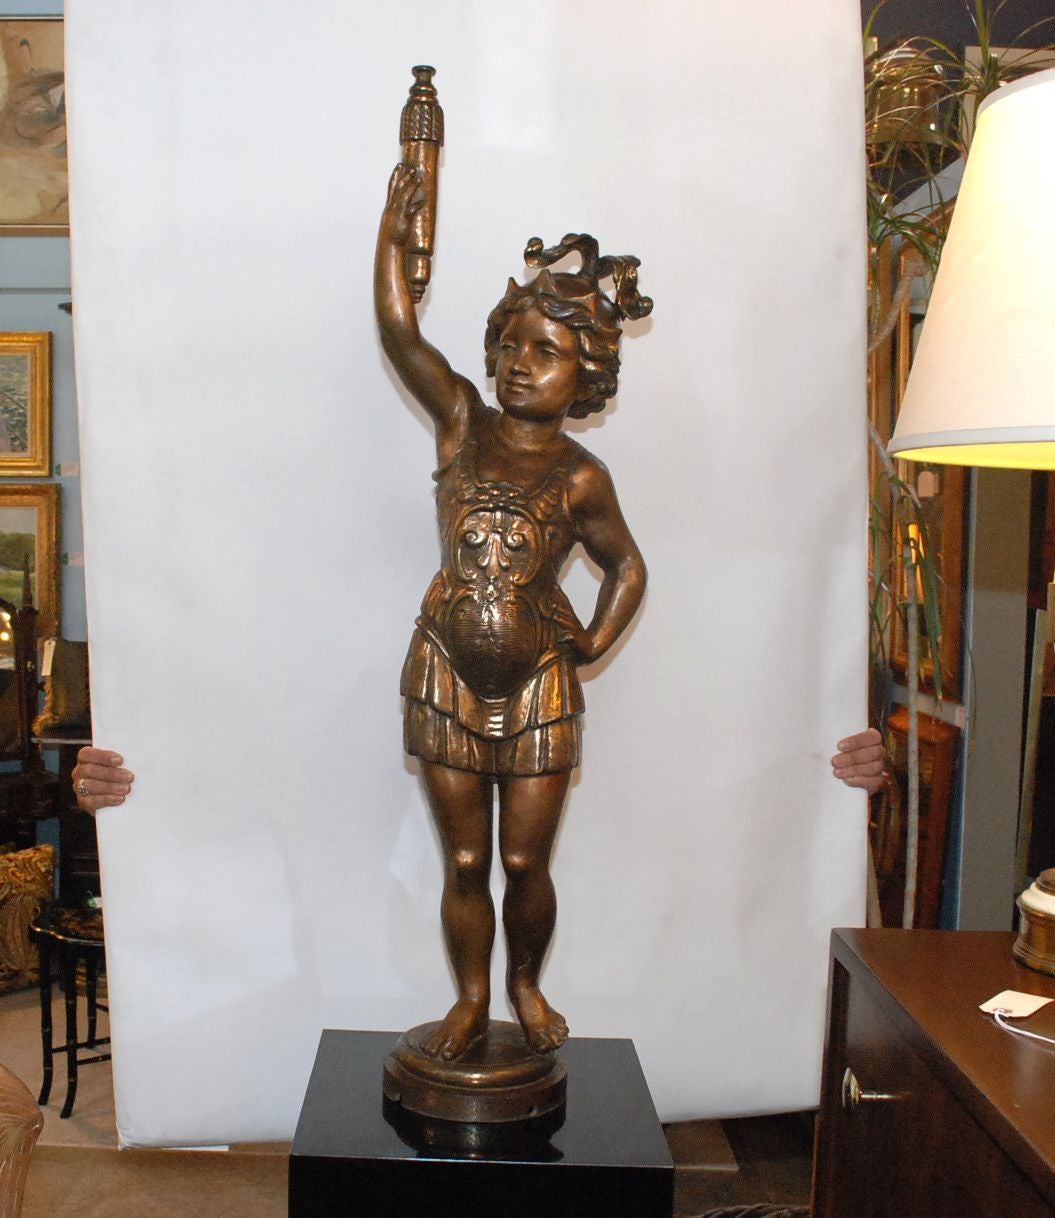 An amazing vintage Italian cast iron sculpture of a Roman lady holding up a torch. There are a total of four holes in the base (one completely cut-out) for use should the sculpture be converted into a lamp. There is also a removable screw in the